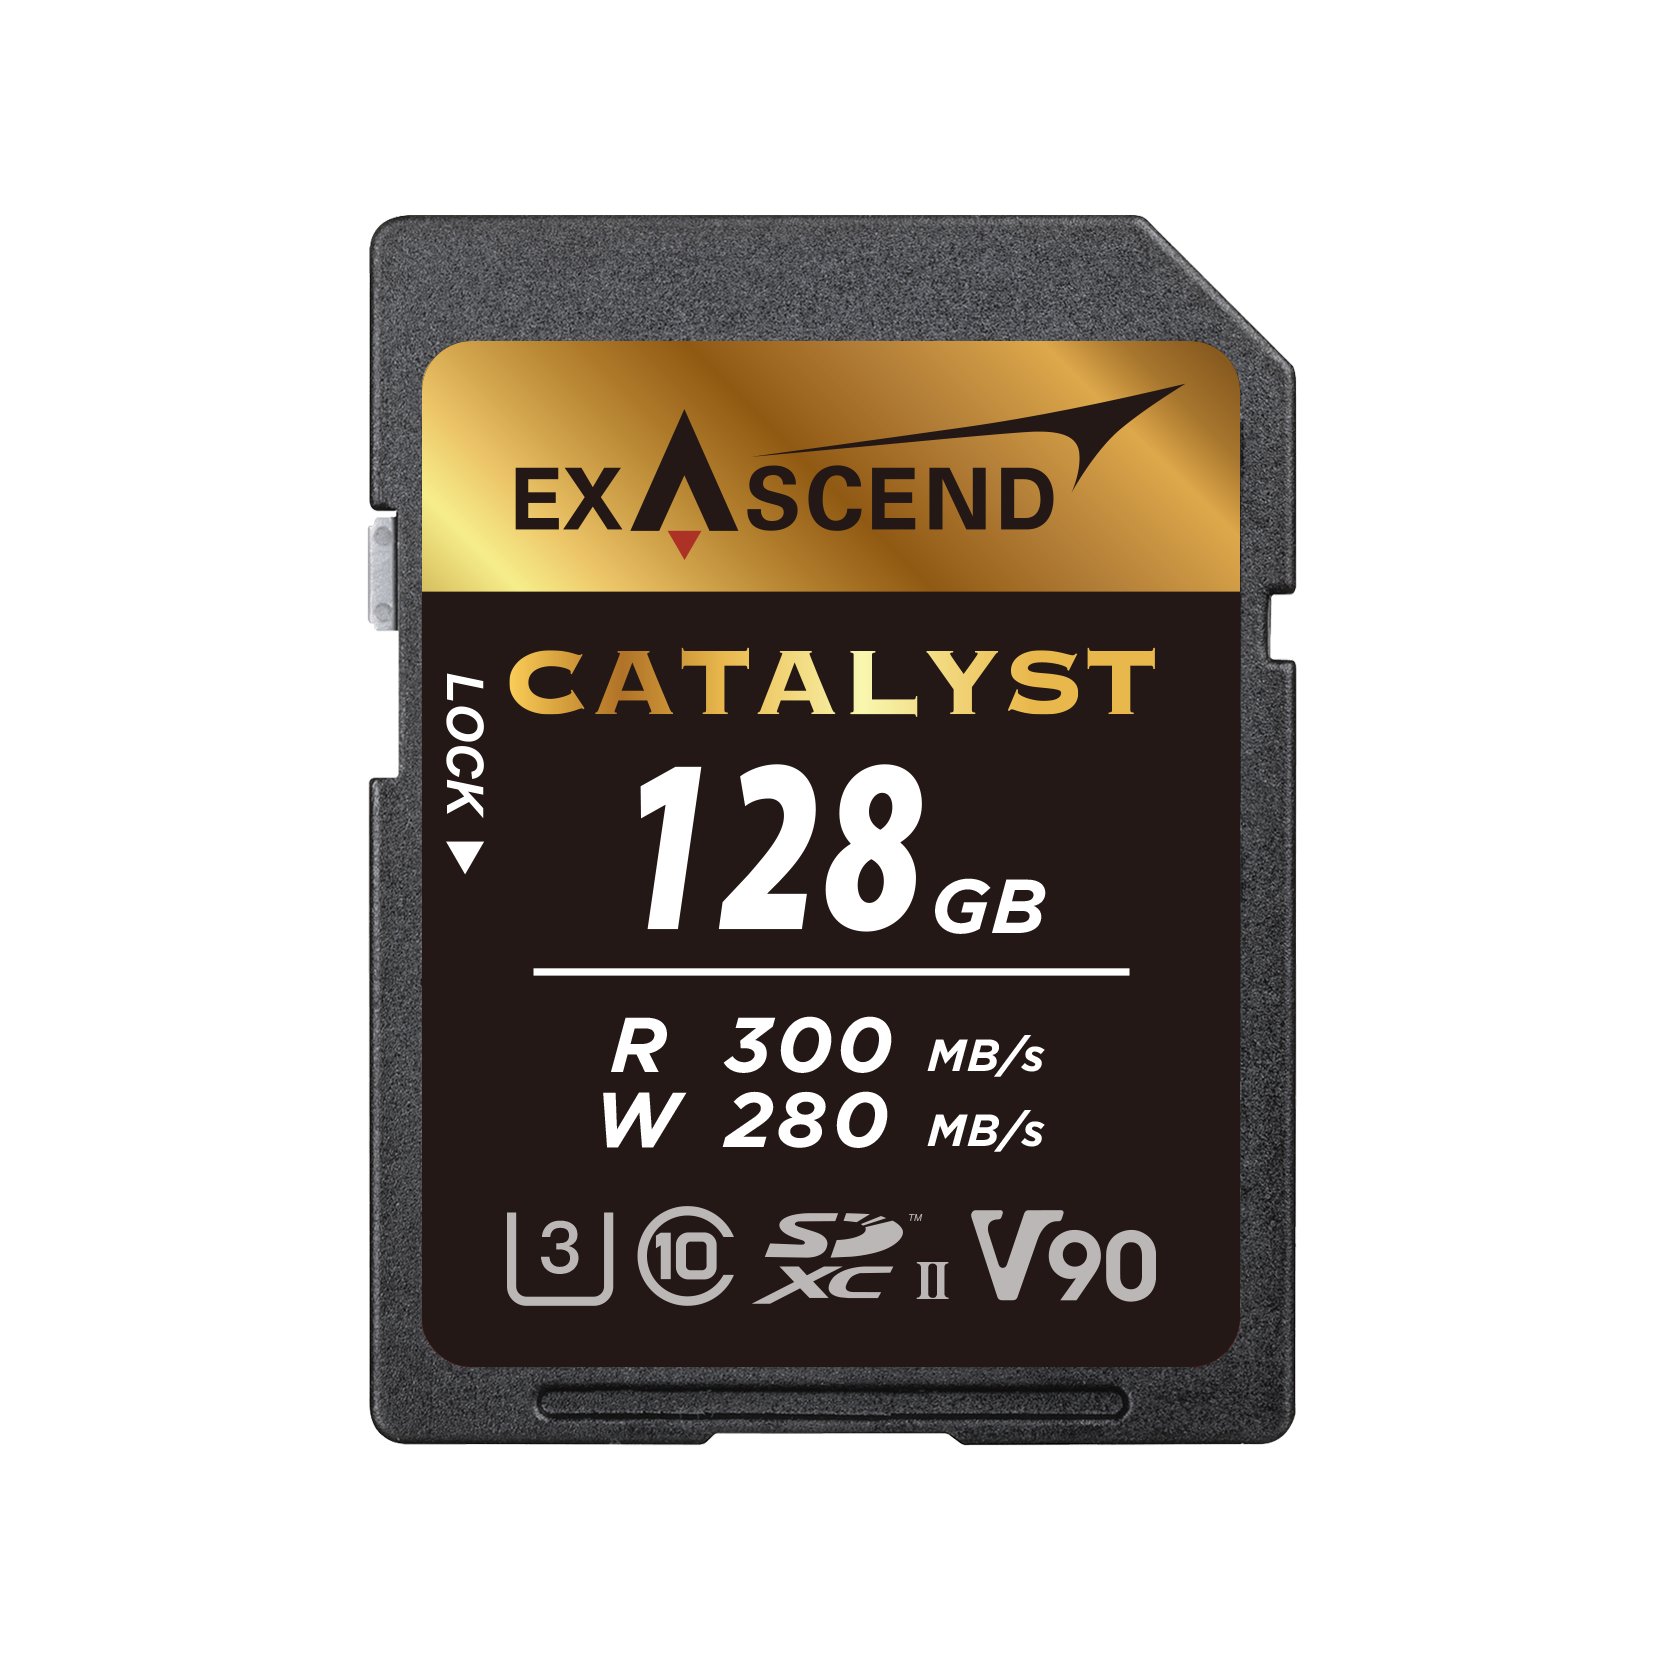 Catalyst V90 SD Card 128GB.png